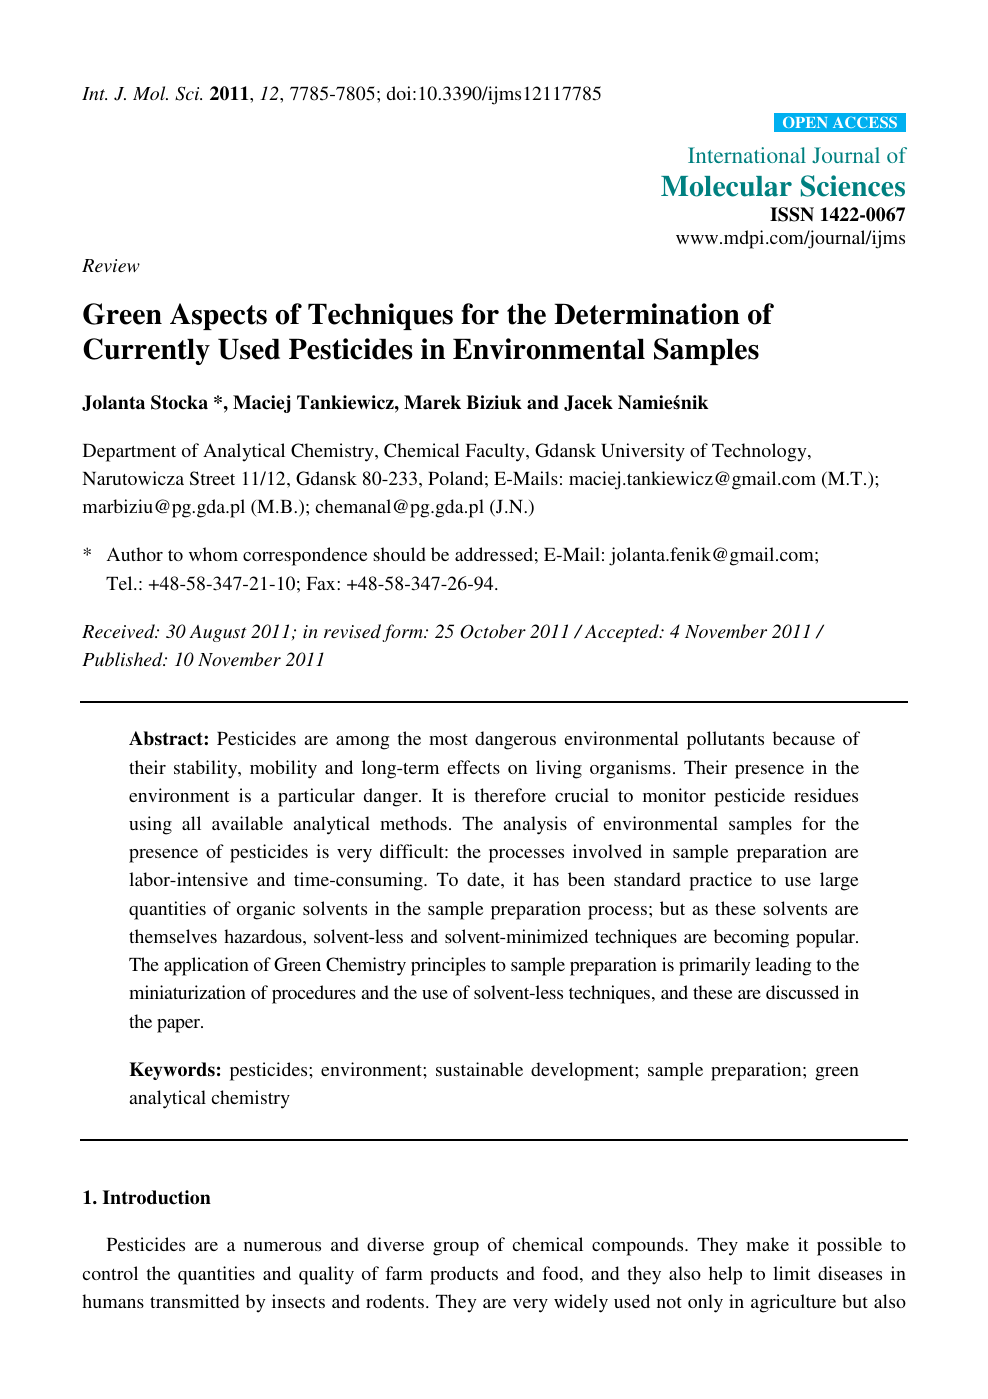 Green Aspects Of Techniques For The Determination Of Currently Used Pesticides In Environmental Samples Topic Of Research Paper In Chemical Sciences Download Scholarly Article Pdf And Read For Free On Cyberleninka